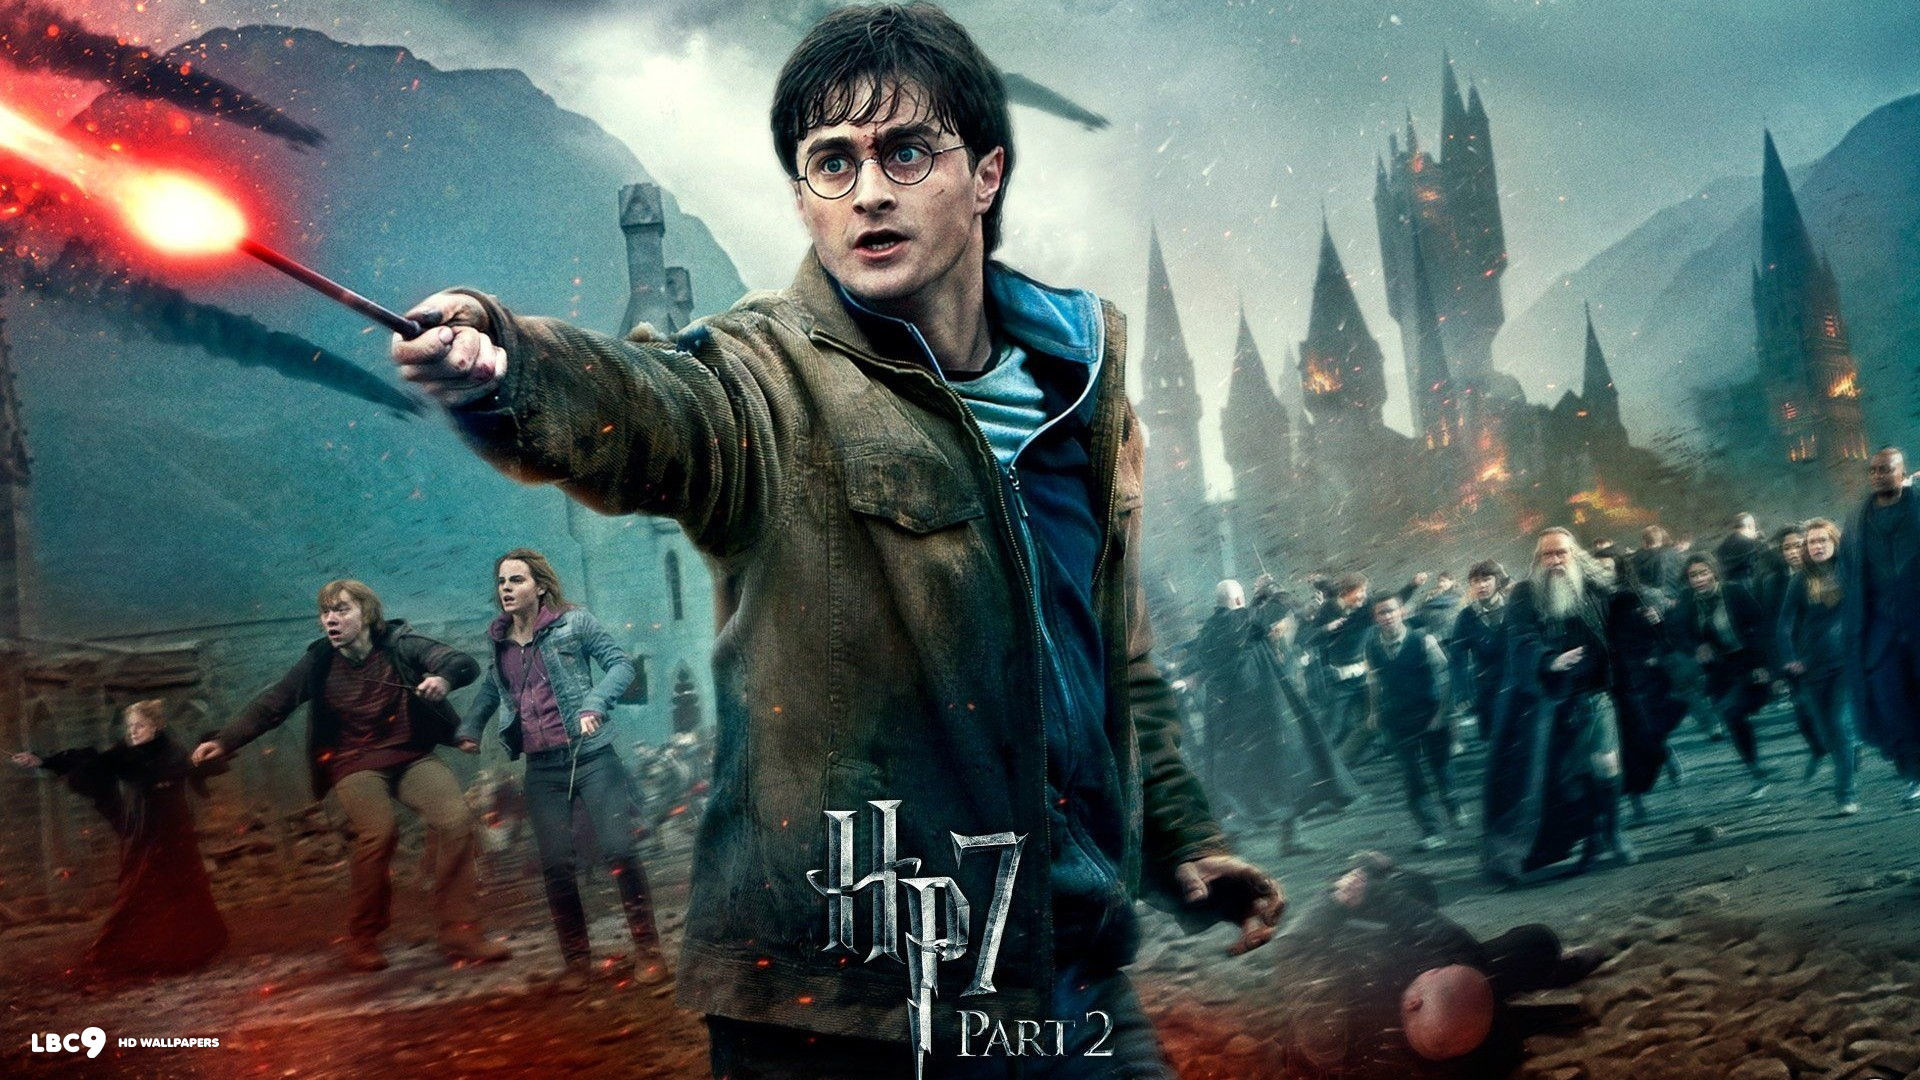 1920x1080 harry potter and the deathly hallows part 2 wide 1080x1920